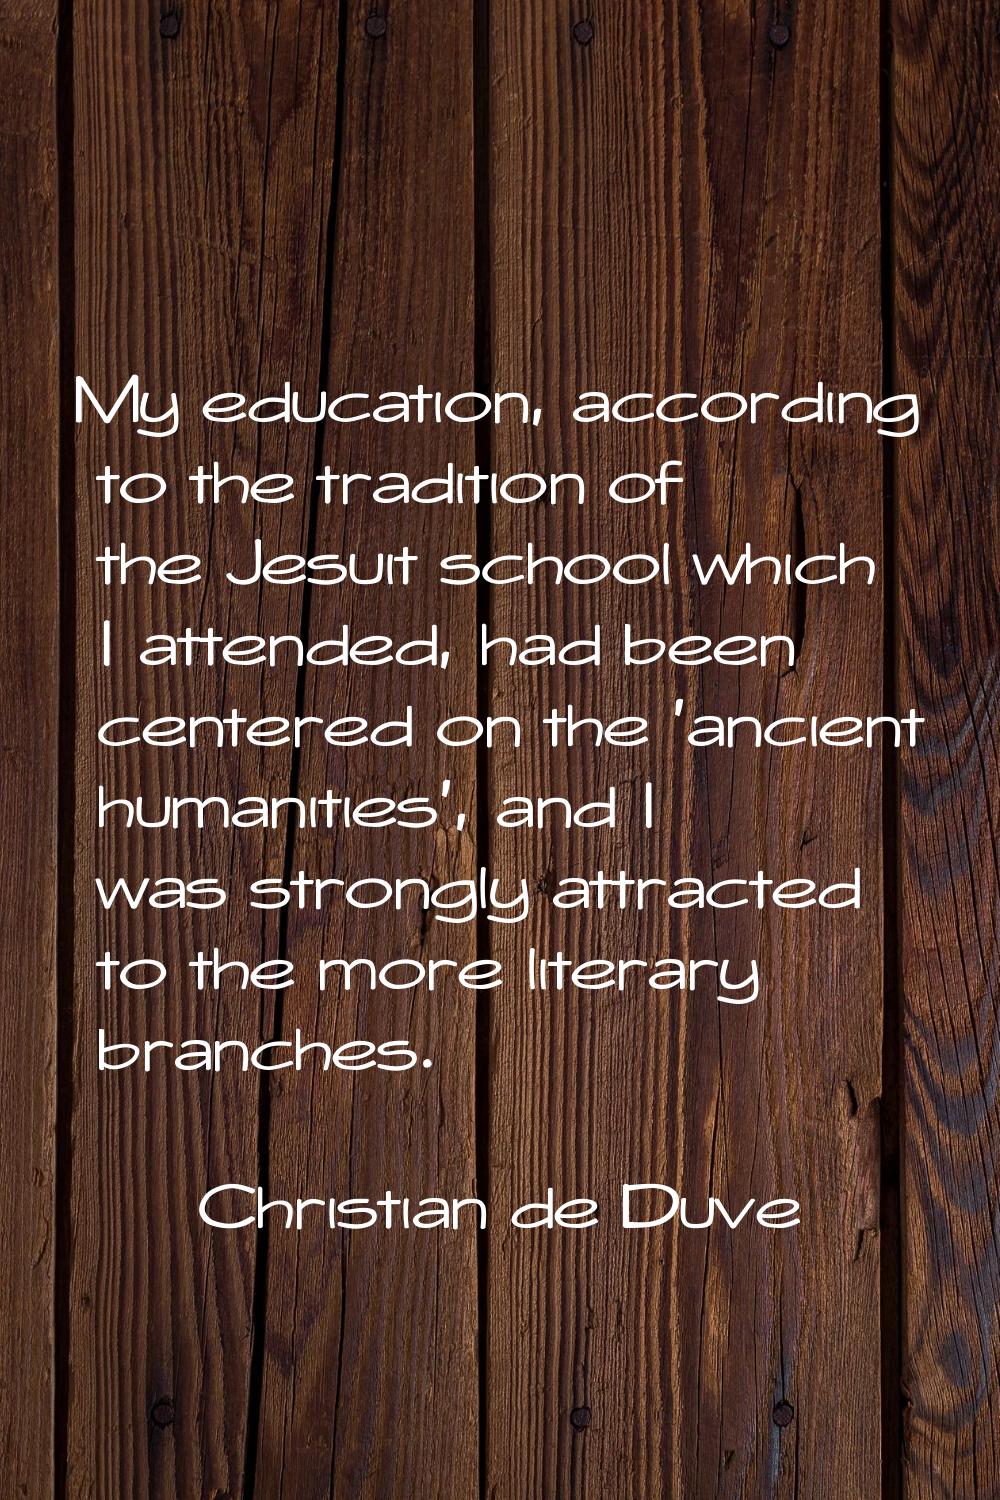 My education, according to the tradition of the Jesuit school which I attended, had been centered o